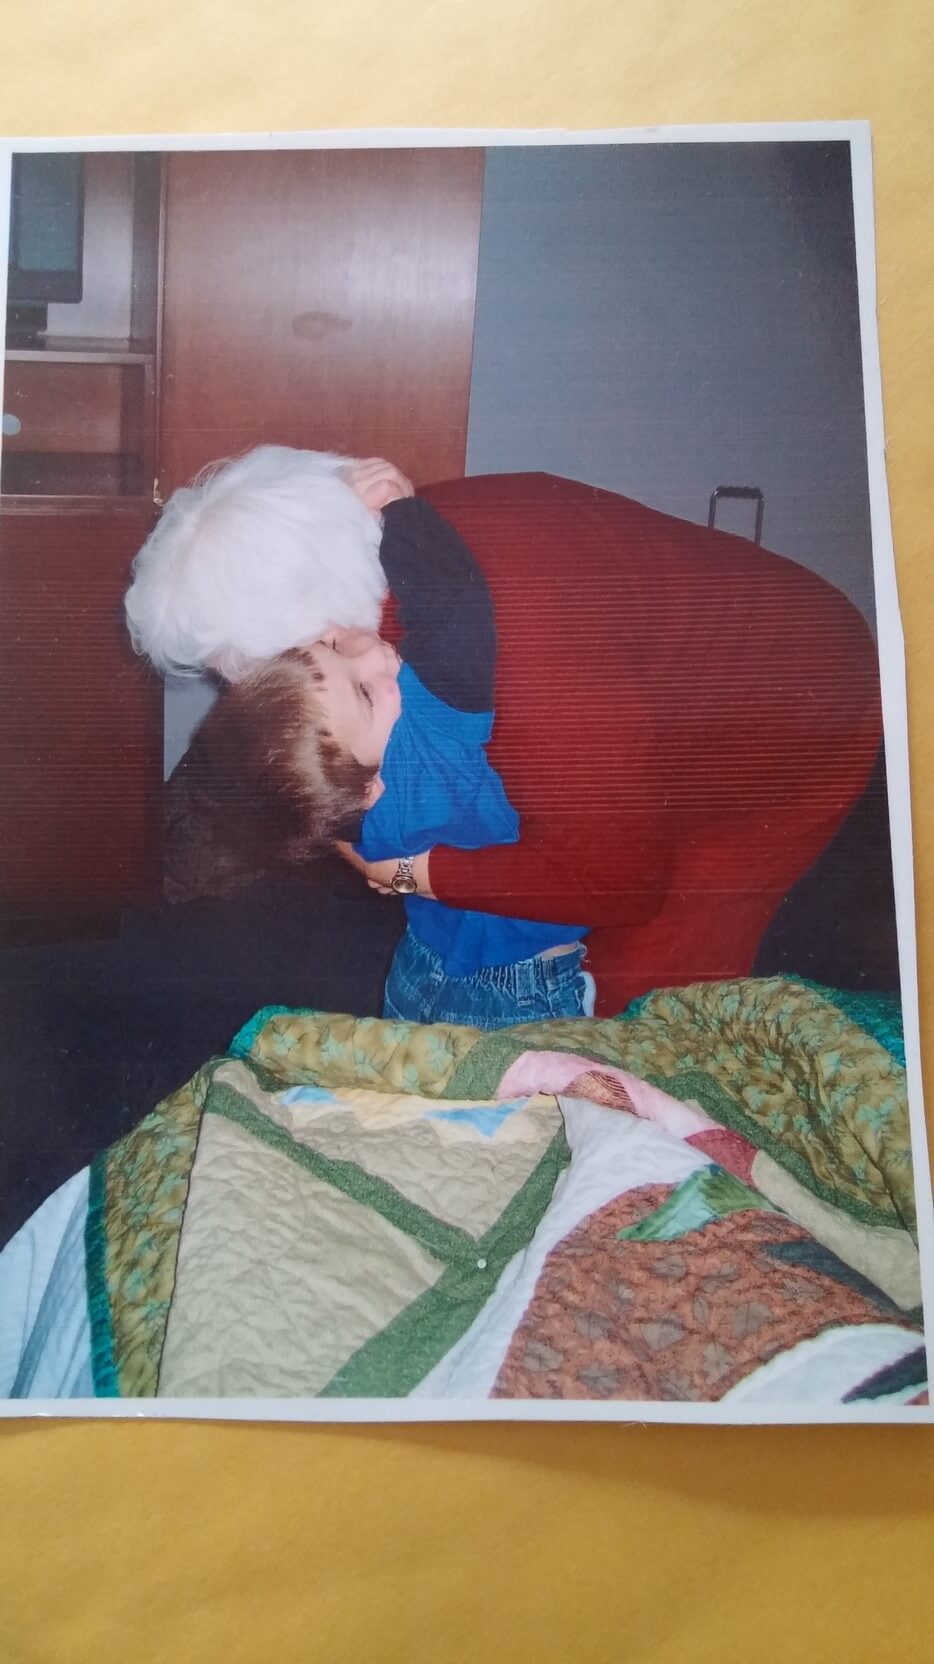 Grandma Rhetta gets a BIG hug from 5-year-old Mario for the beautiful quilt she made him.